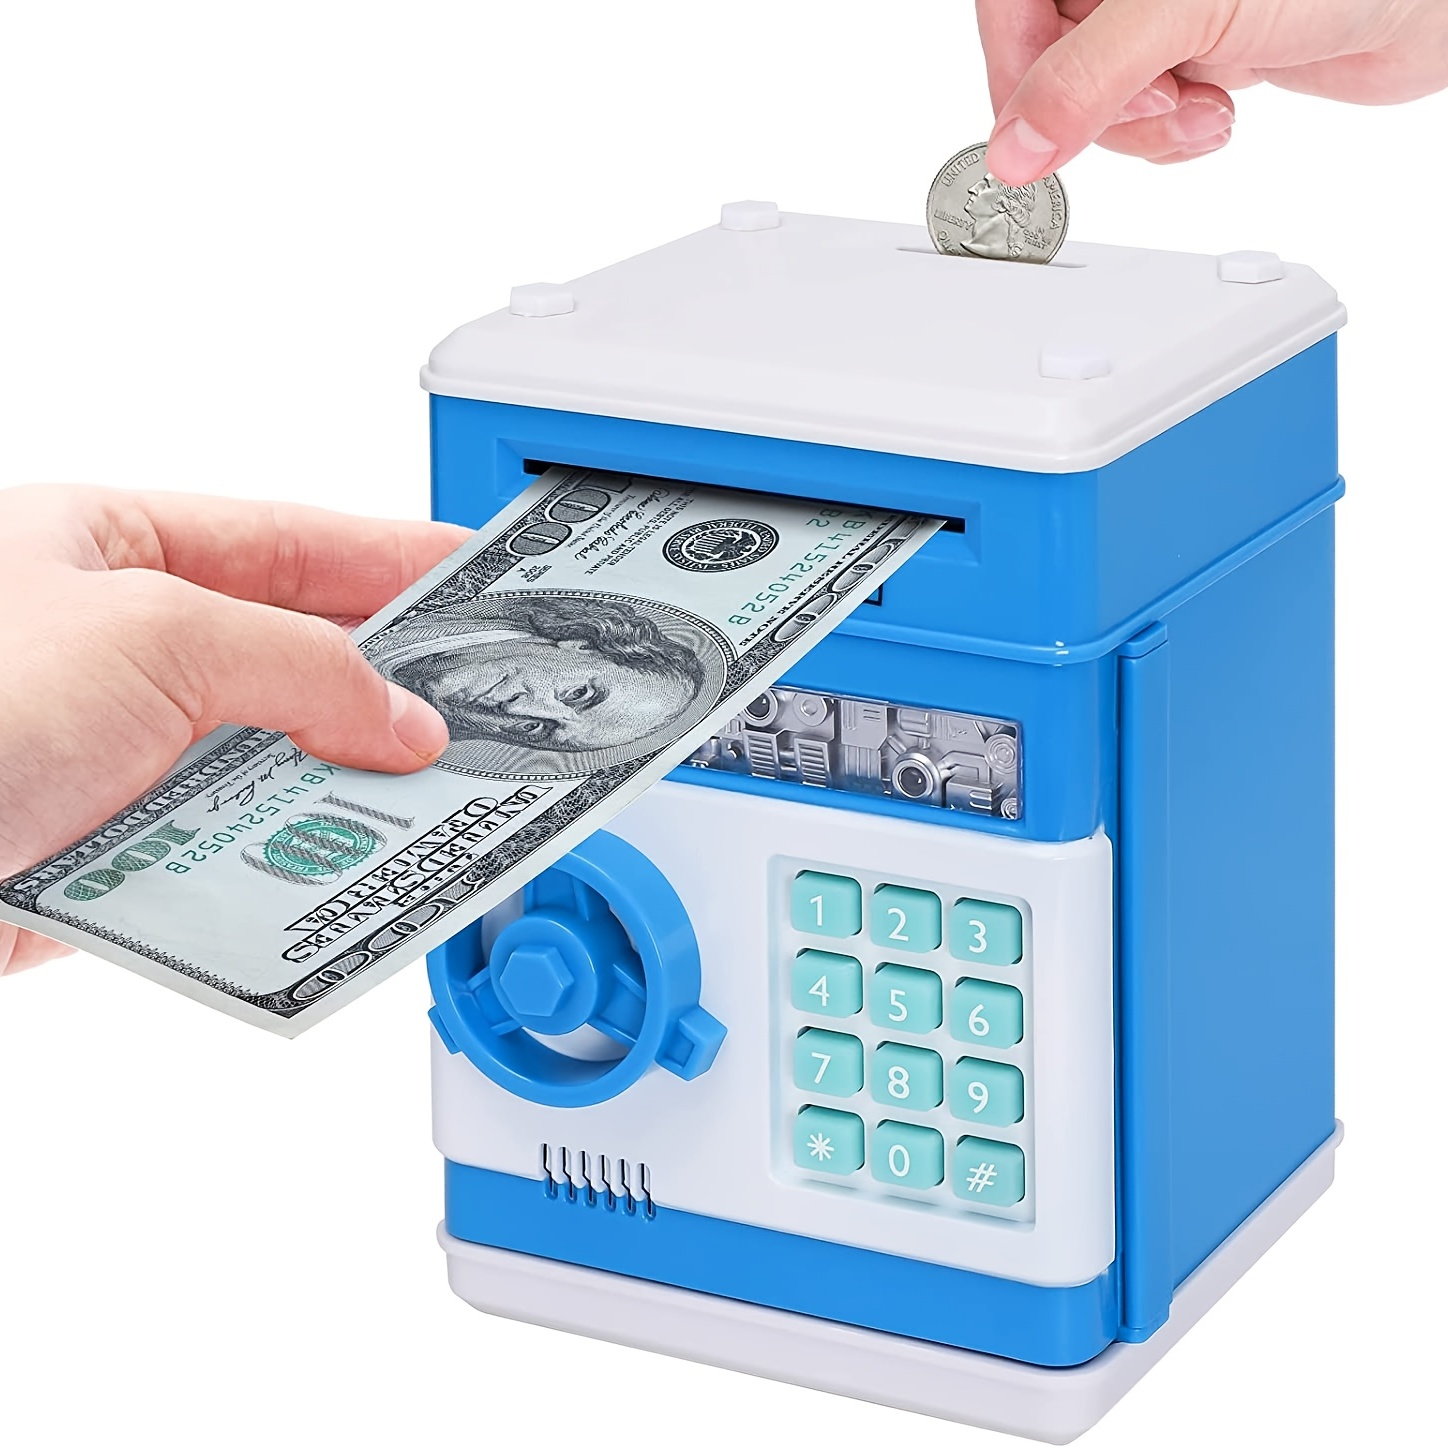 HOME MONEY SAFE WITH PASSWORD! Bills & Coins in the Safe! Protect